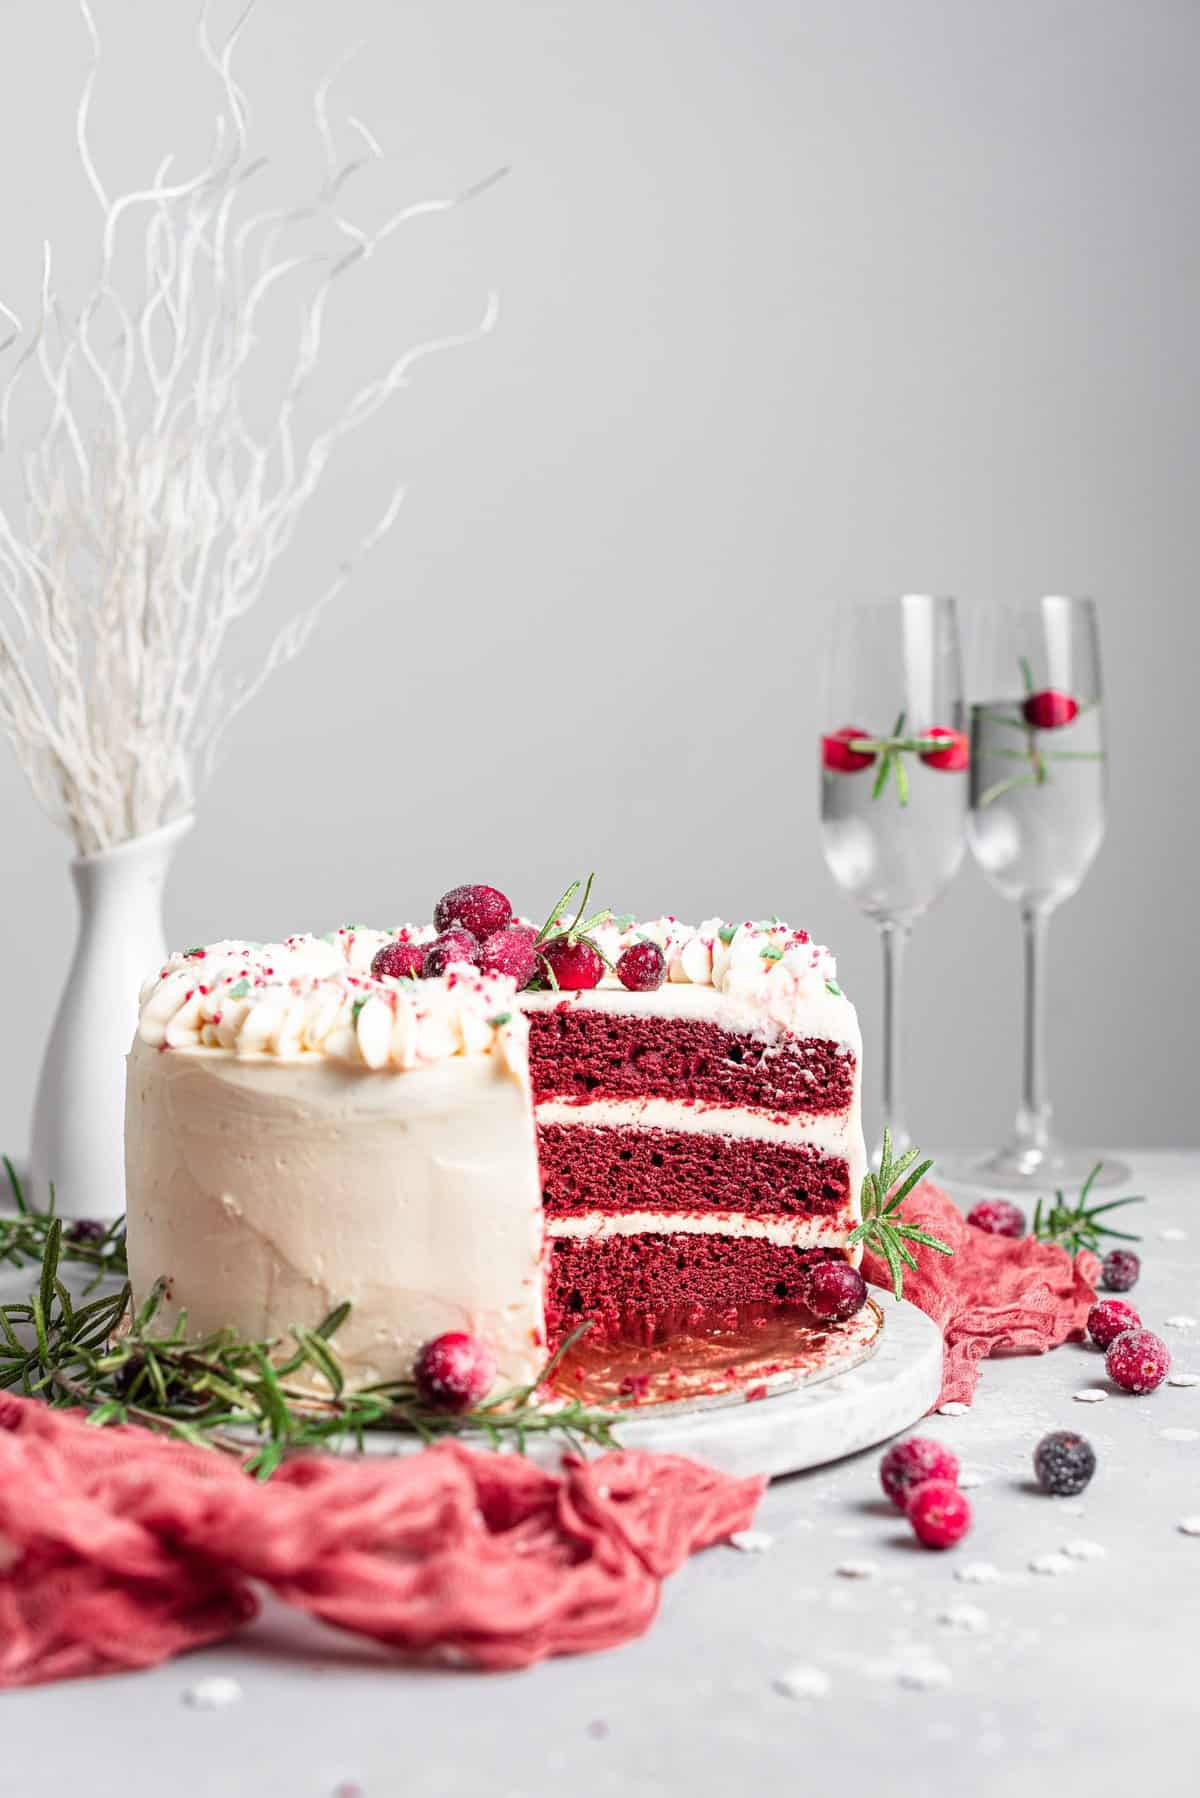 Cake partially cut and exposing the red layers on white cake plate with champagne flutes in background. 